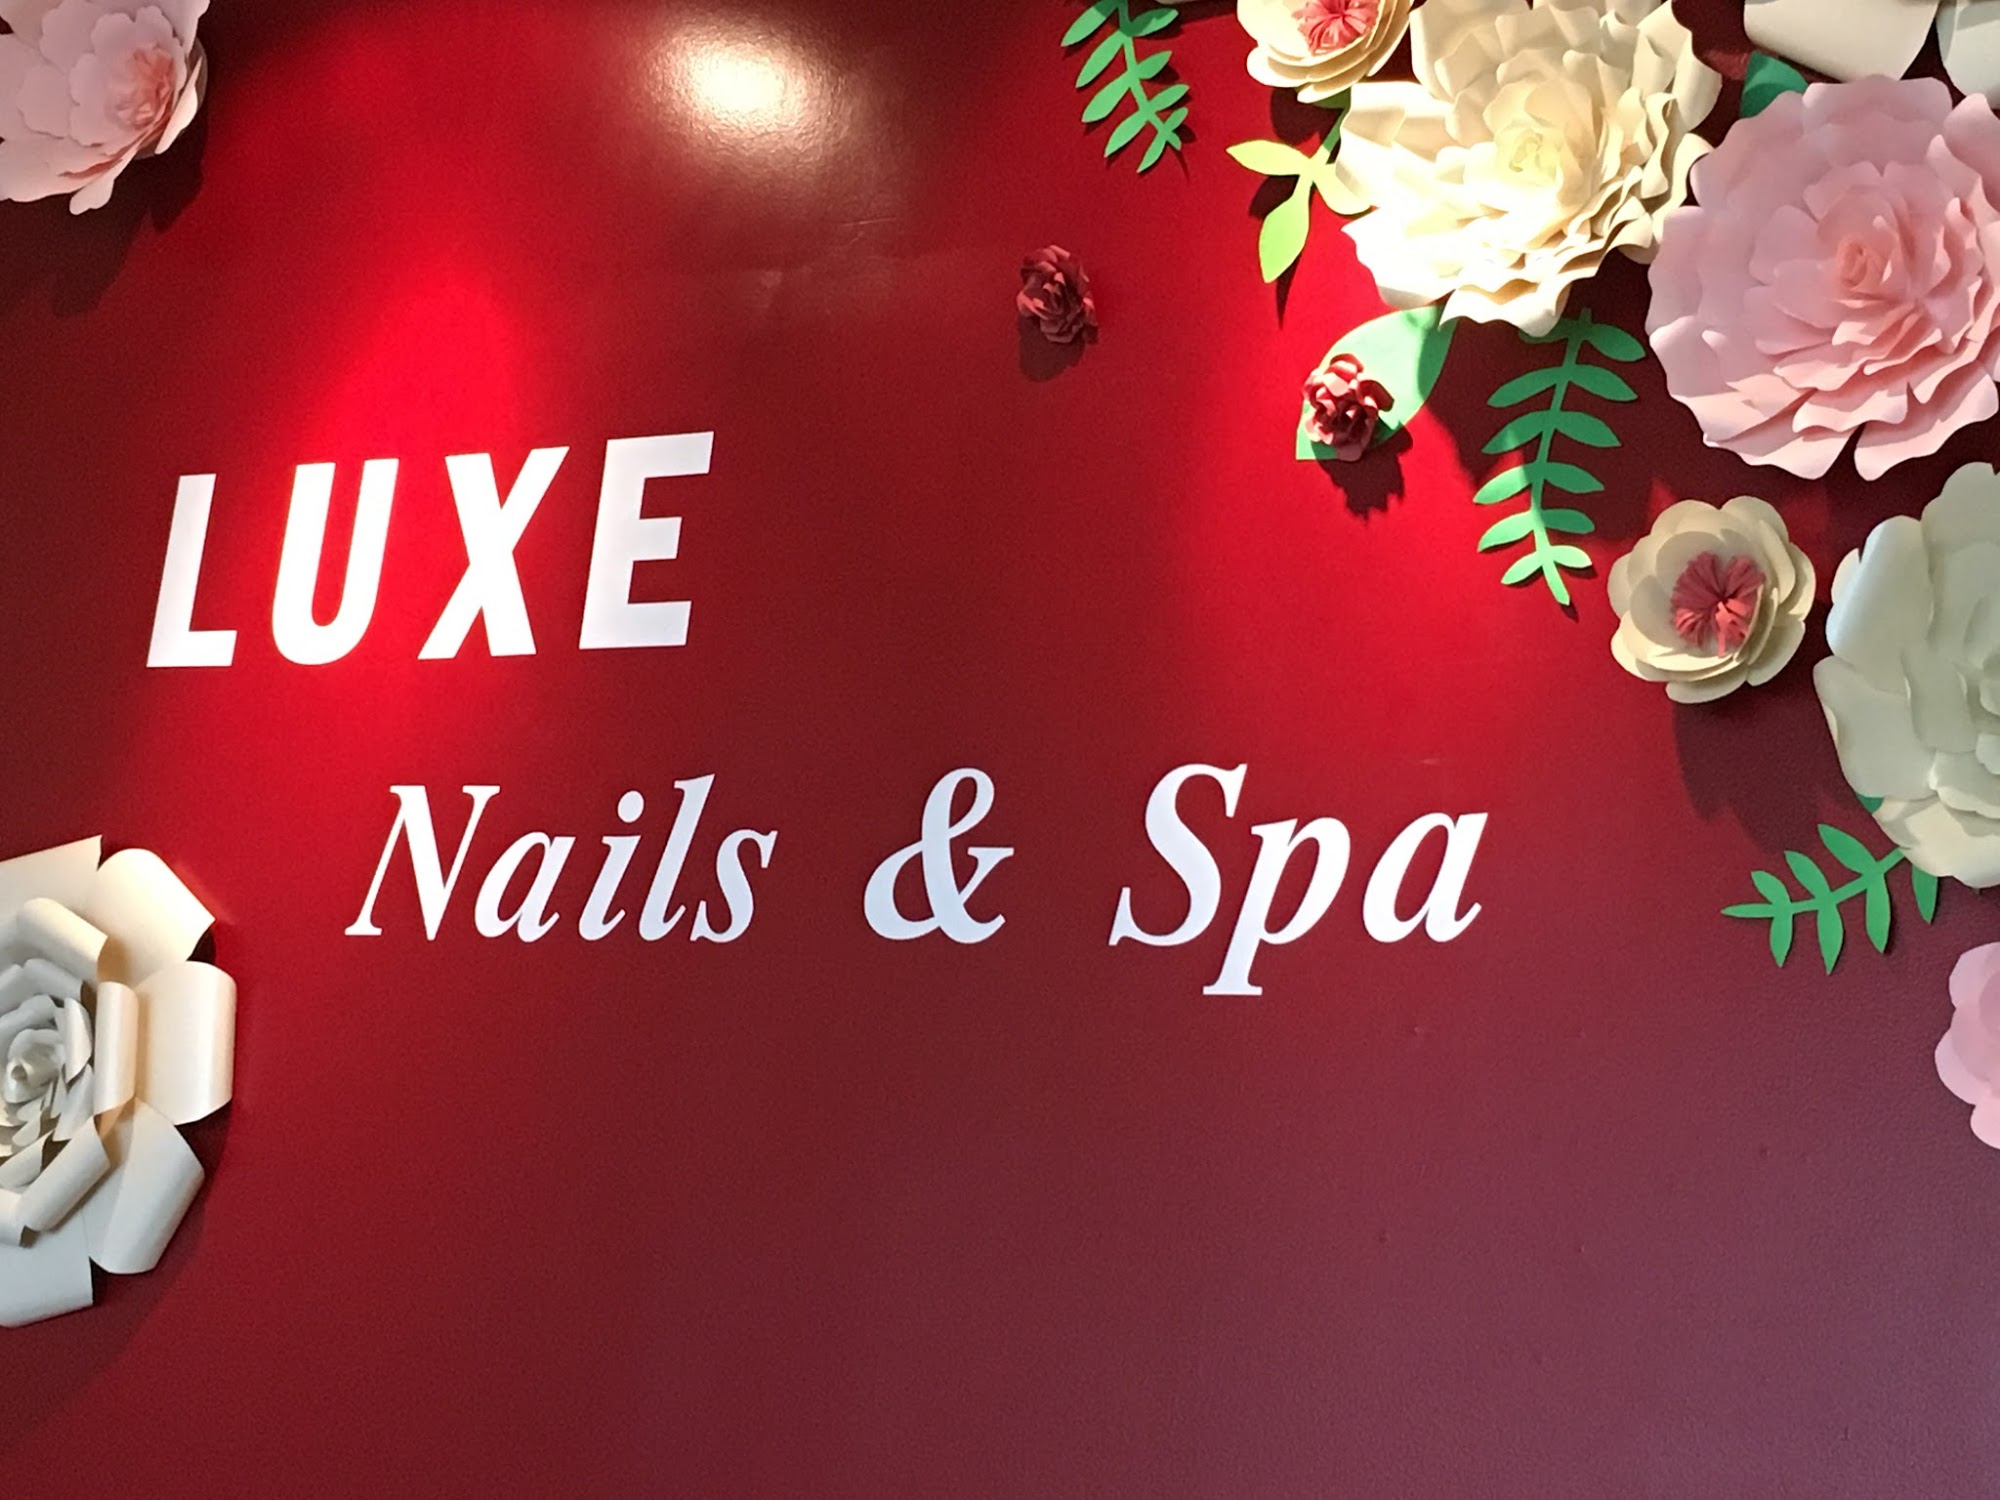 Luxe Nails and Spa